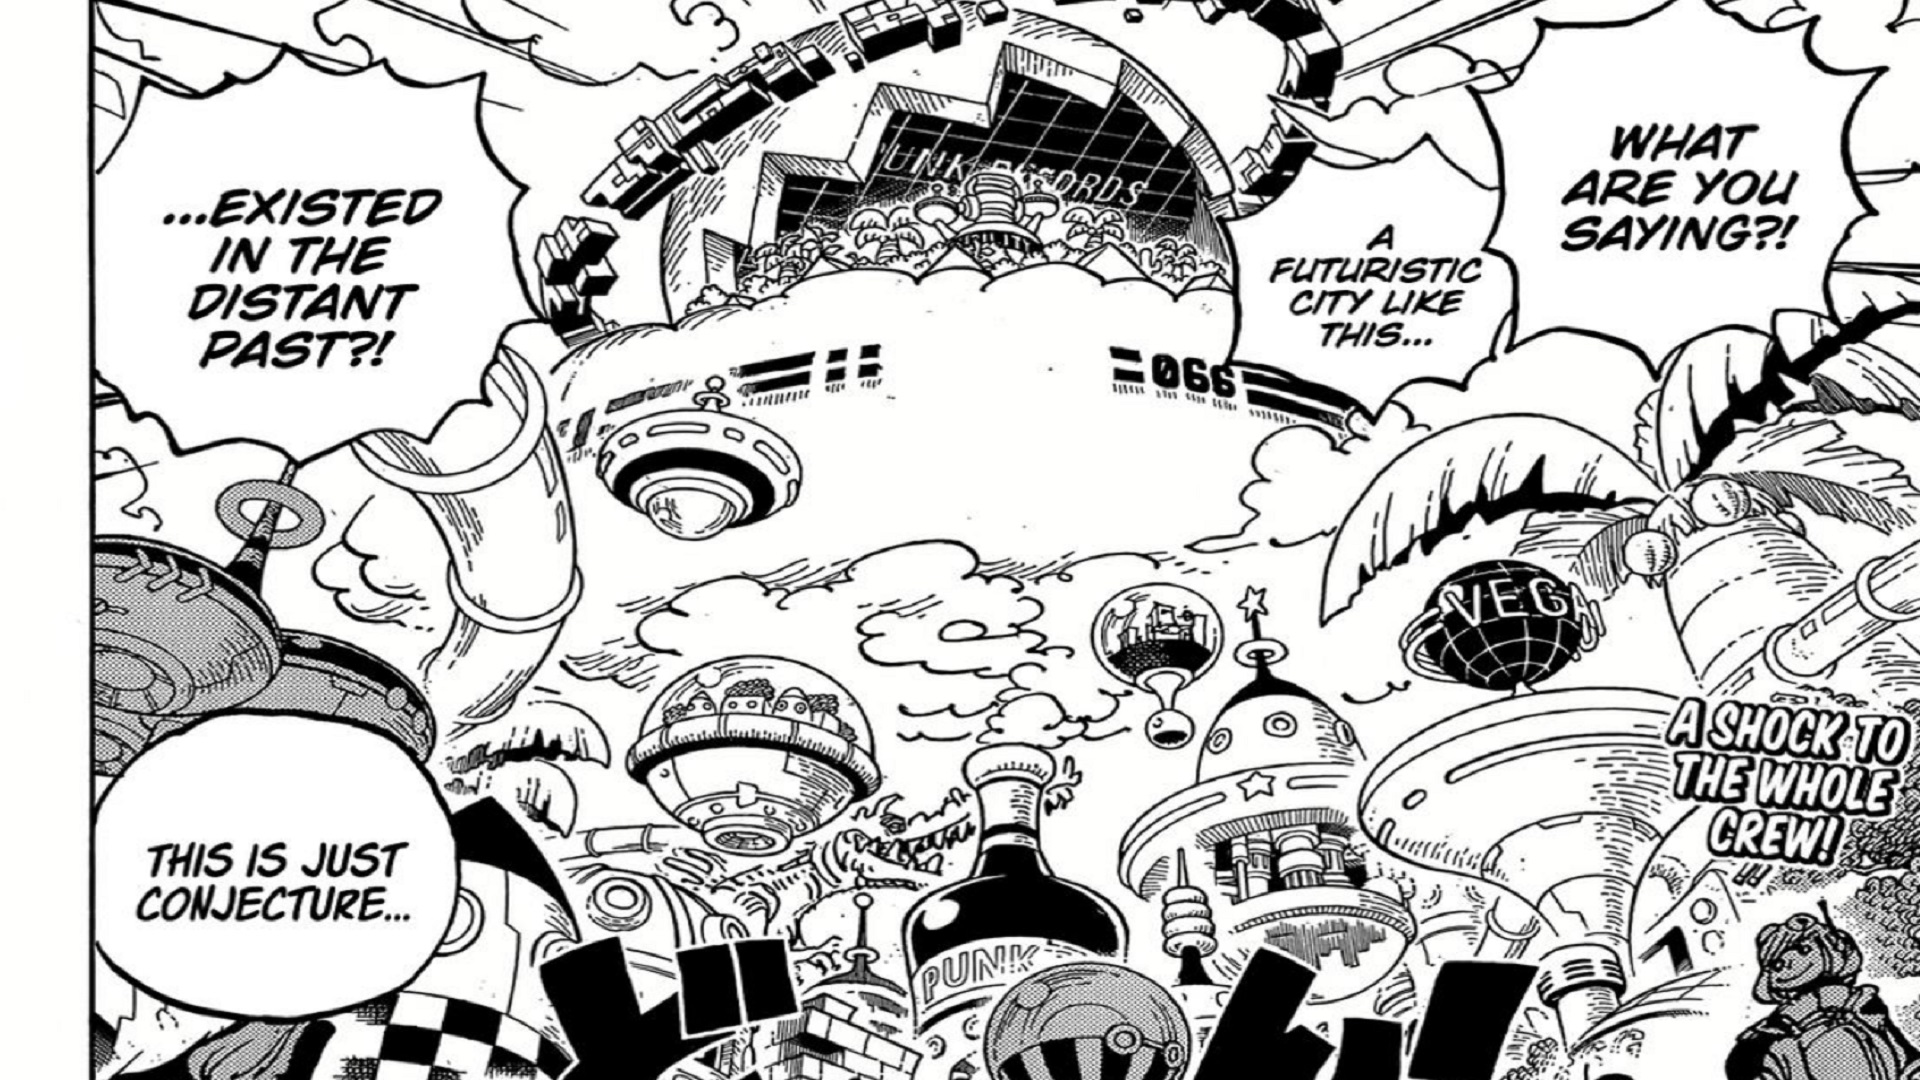 One Piece 1065 Egghead Island is the Home of Dr Vegapunk.